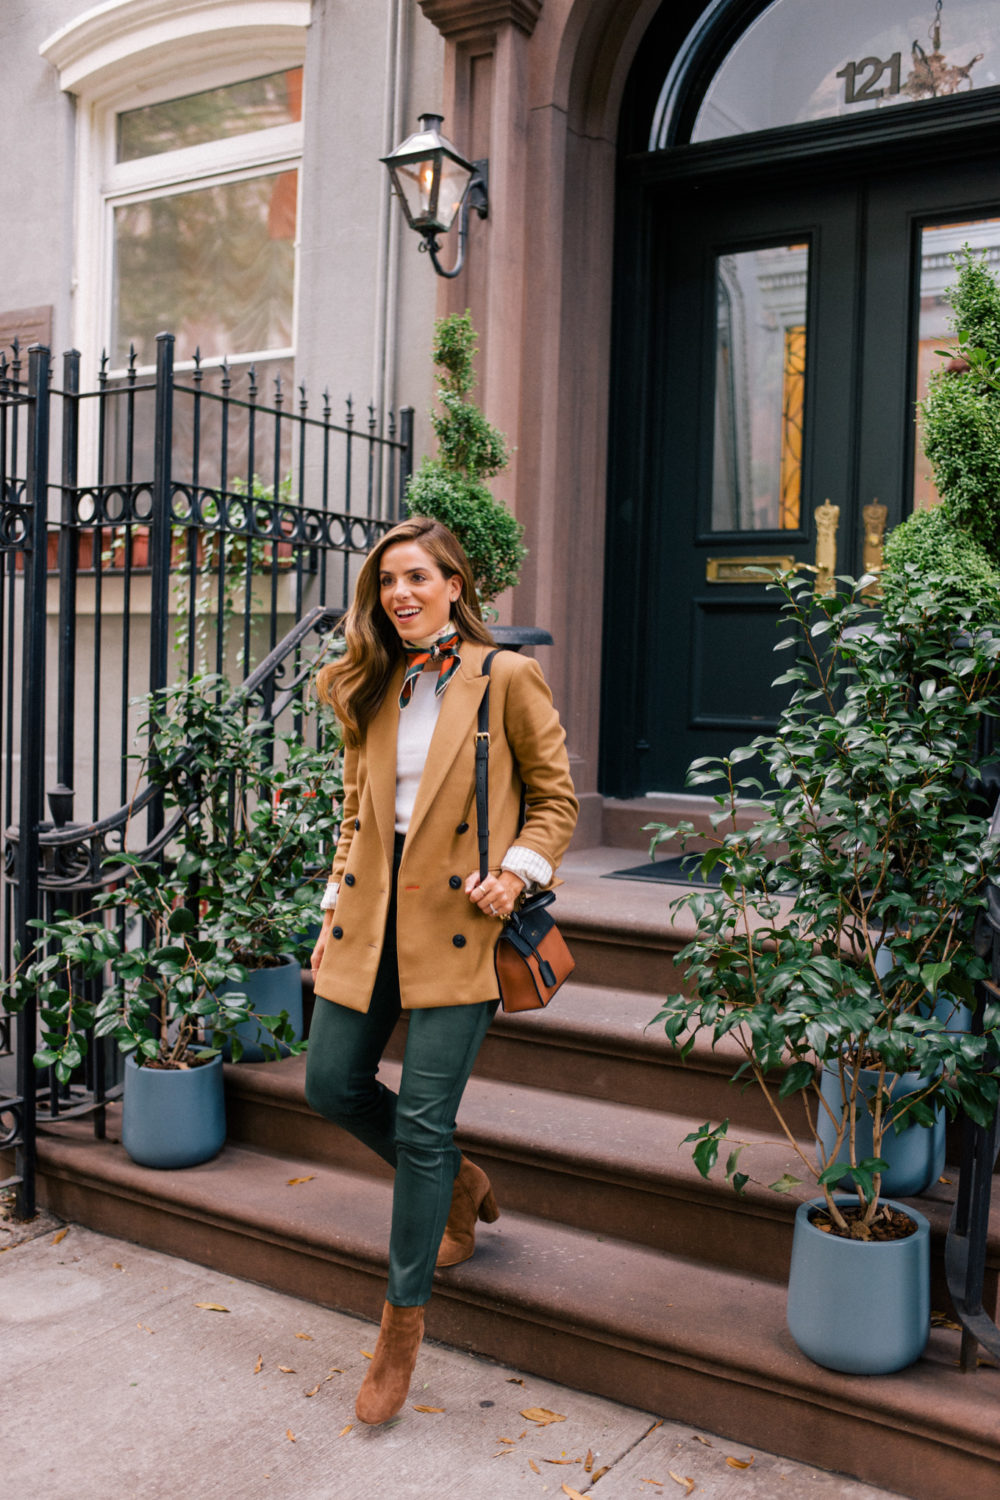 This Item Has Been Taking Over My Fall Style - Julia Berolzheimer